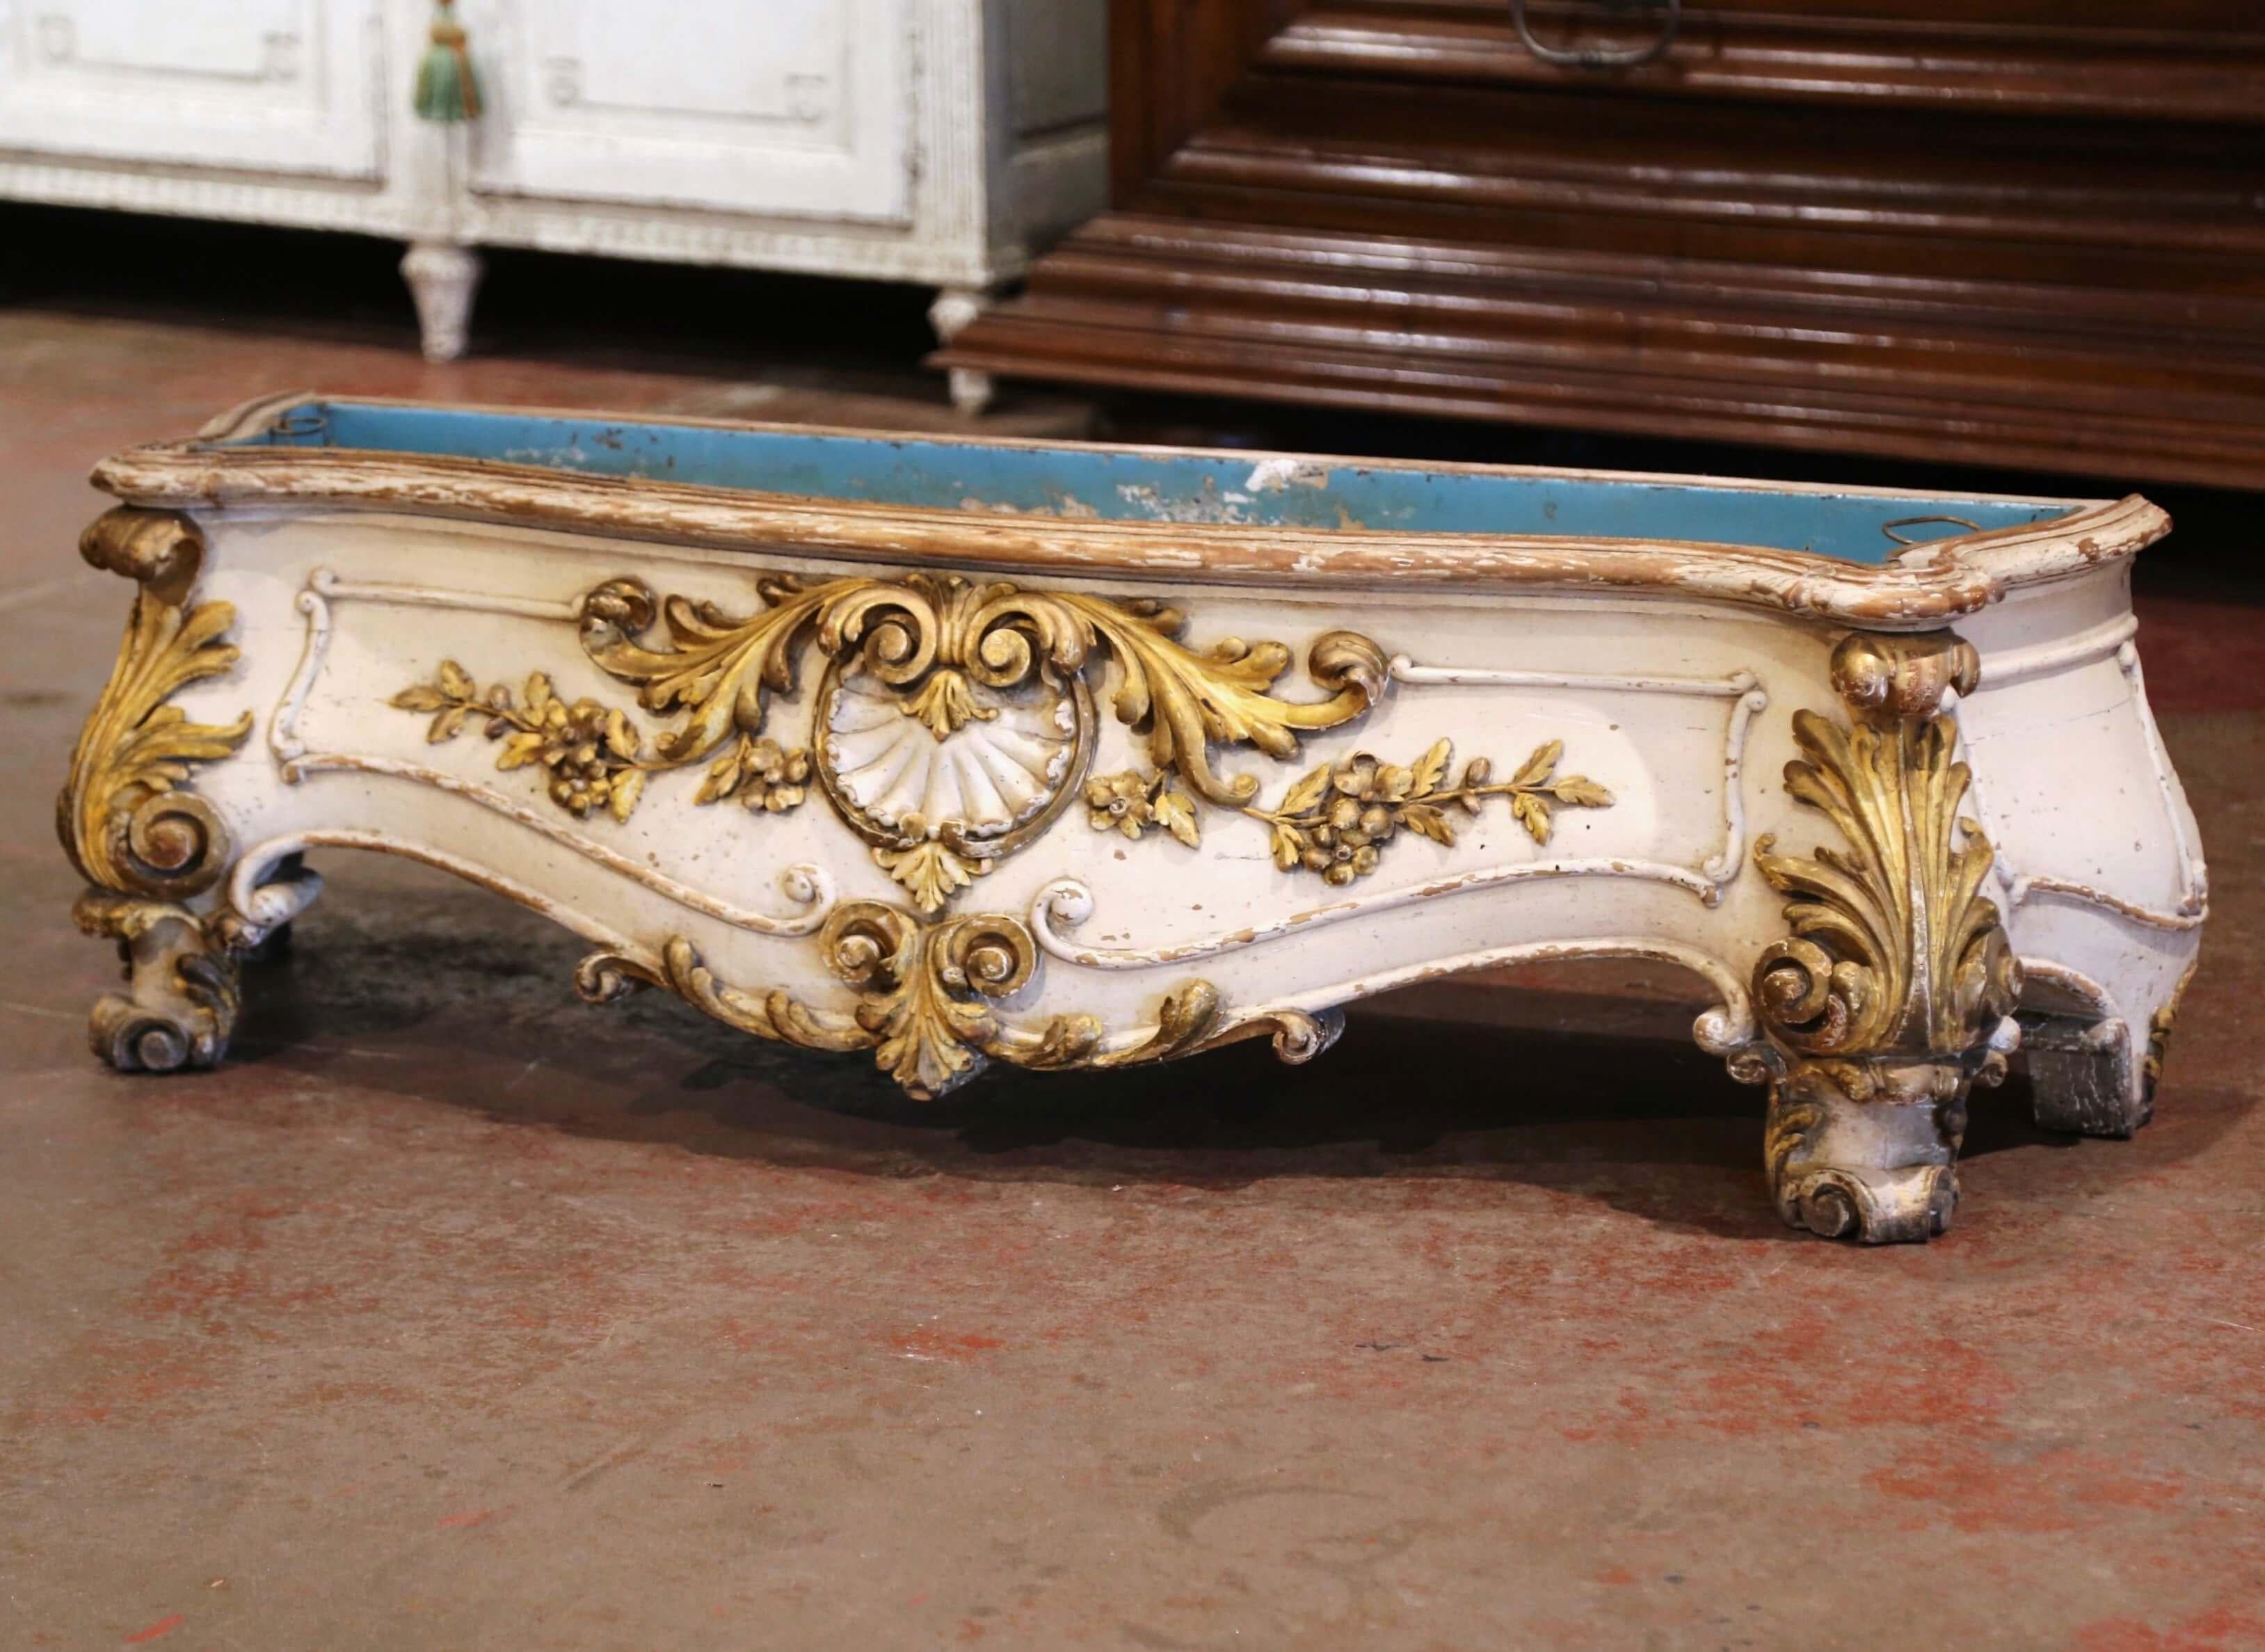 Wood Early 19th Century, French Louis XV Carved Painted & Gilt Bombe Floor Jardinière For Sale